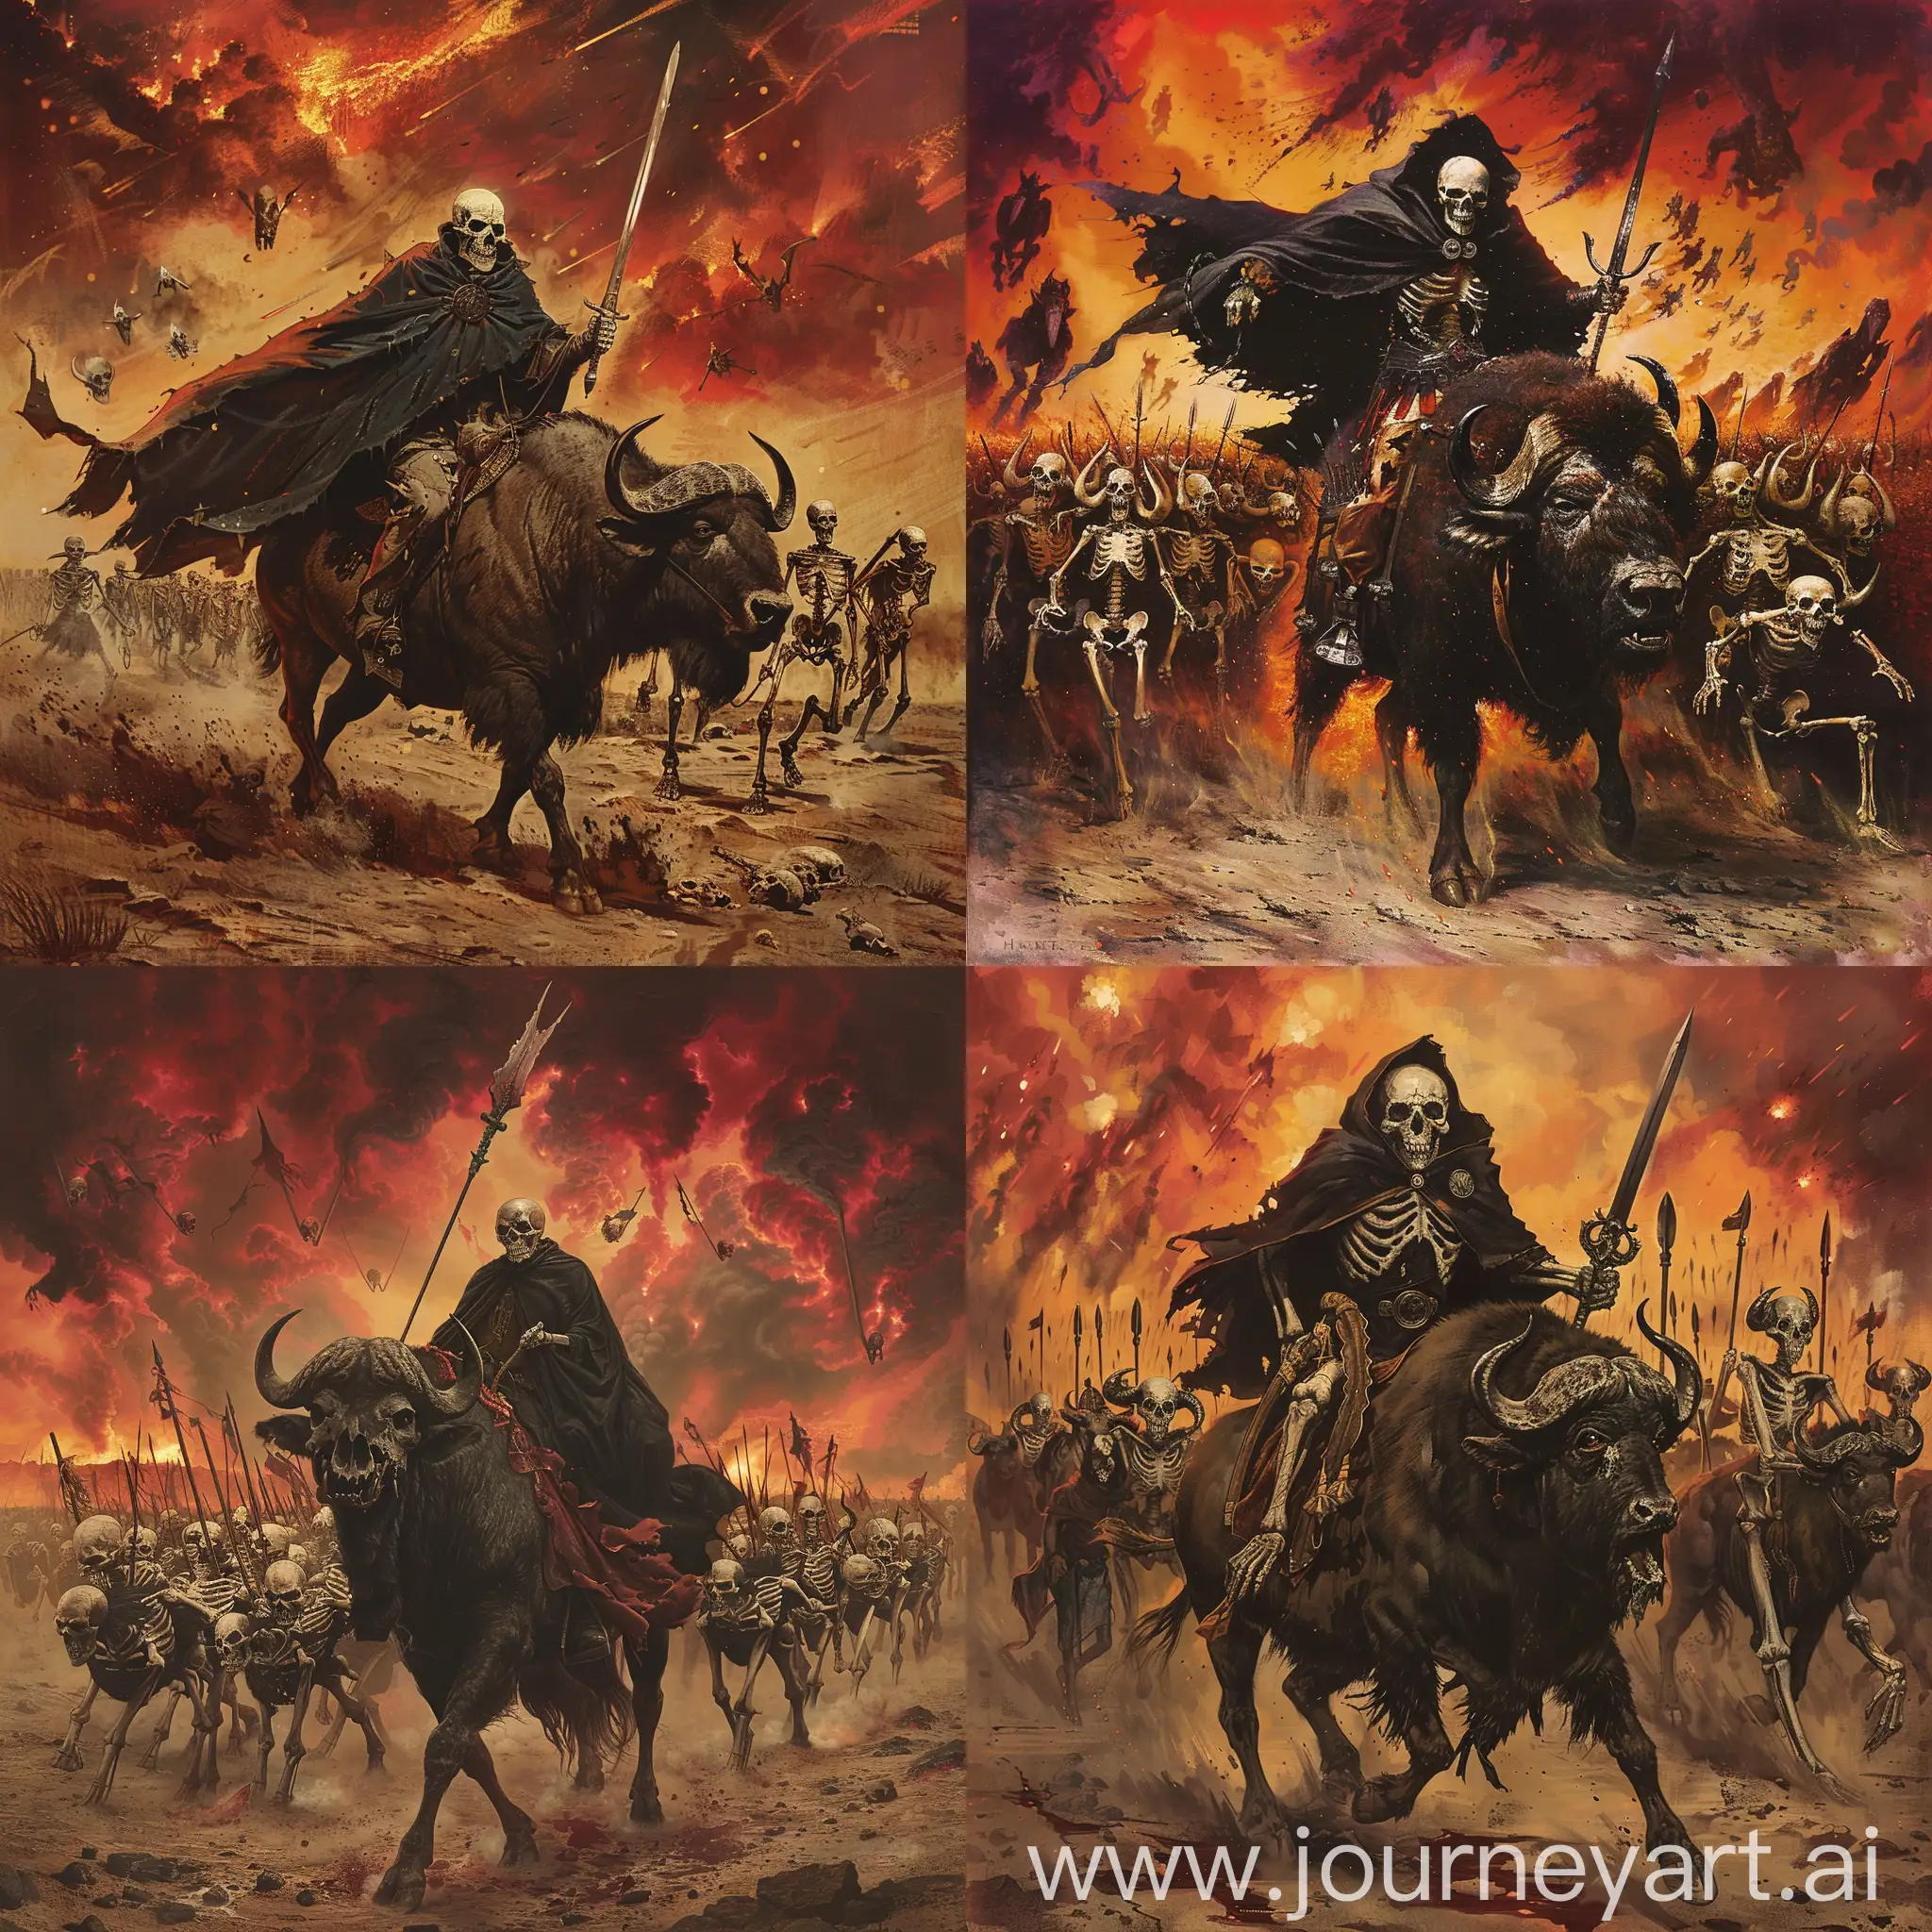 A dramatic scene of Hades, the Greek god of the underworld, leading a vast skeletal army into an apocalyptic battle. Hades is depicted with a skull head, draped in a black cloak, riding a powerful buffalo, and wielding a sword in a three-quarter pose. His skeletal army, some with horns, marches behind him under a fiery, blood-red sky. --s 750 --v 6 --style dark fantasy --chaos 40